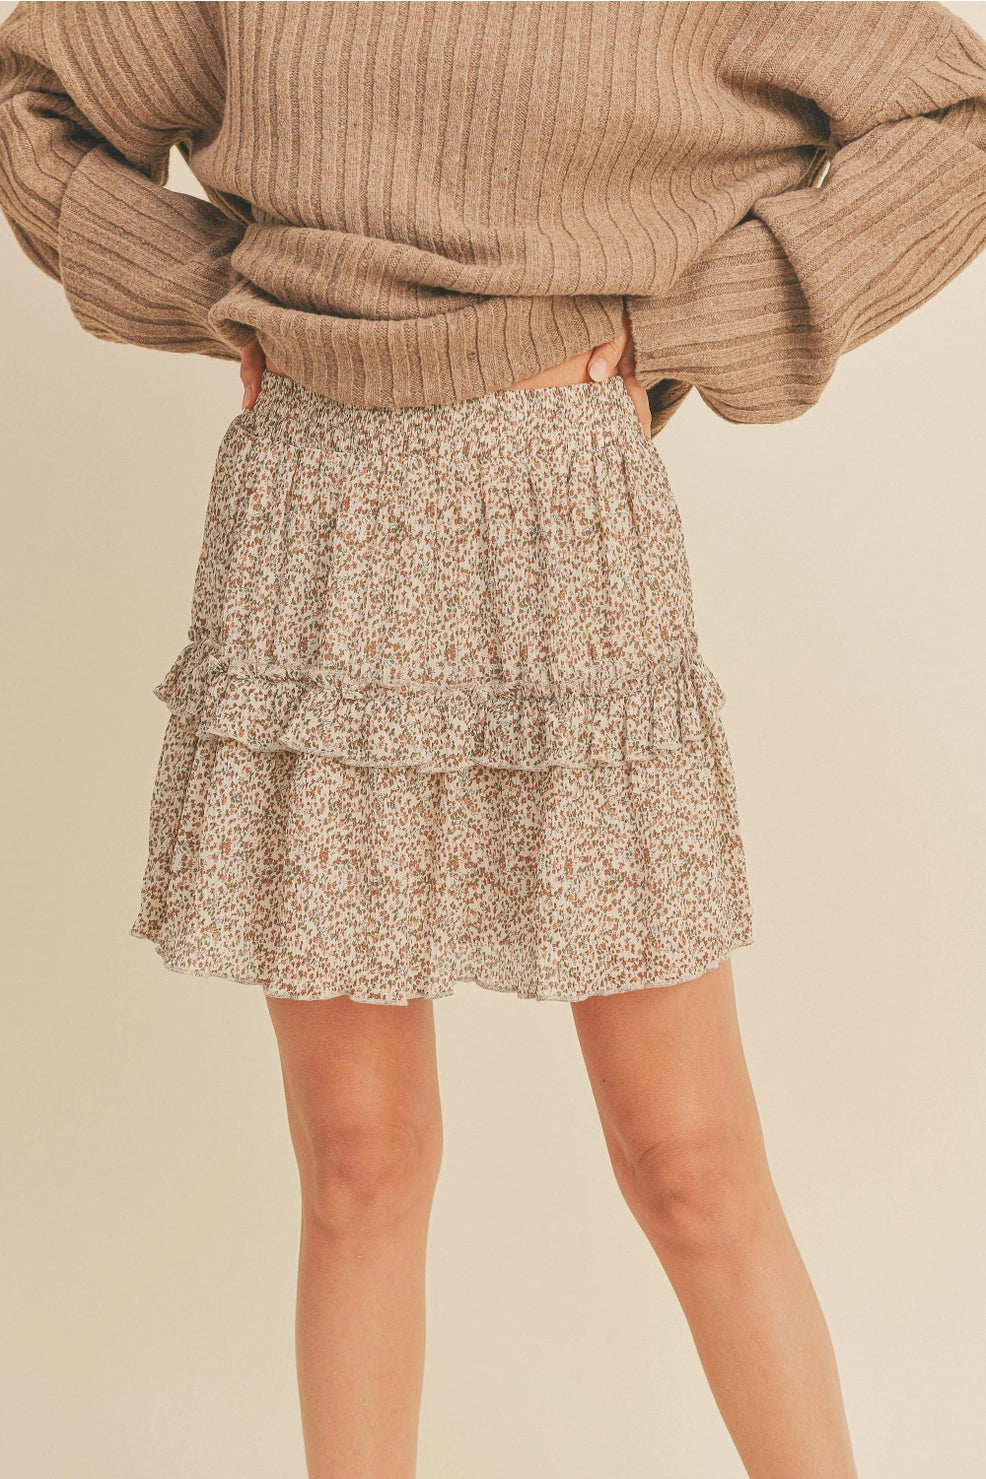 the Piper ditsy floral skirt